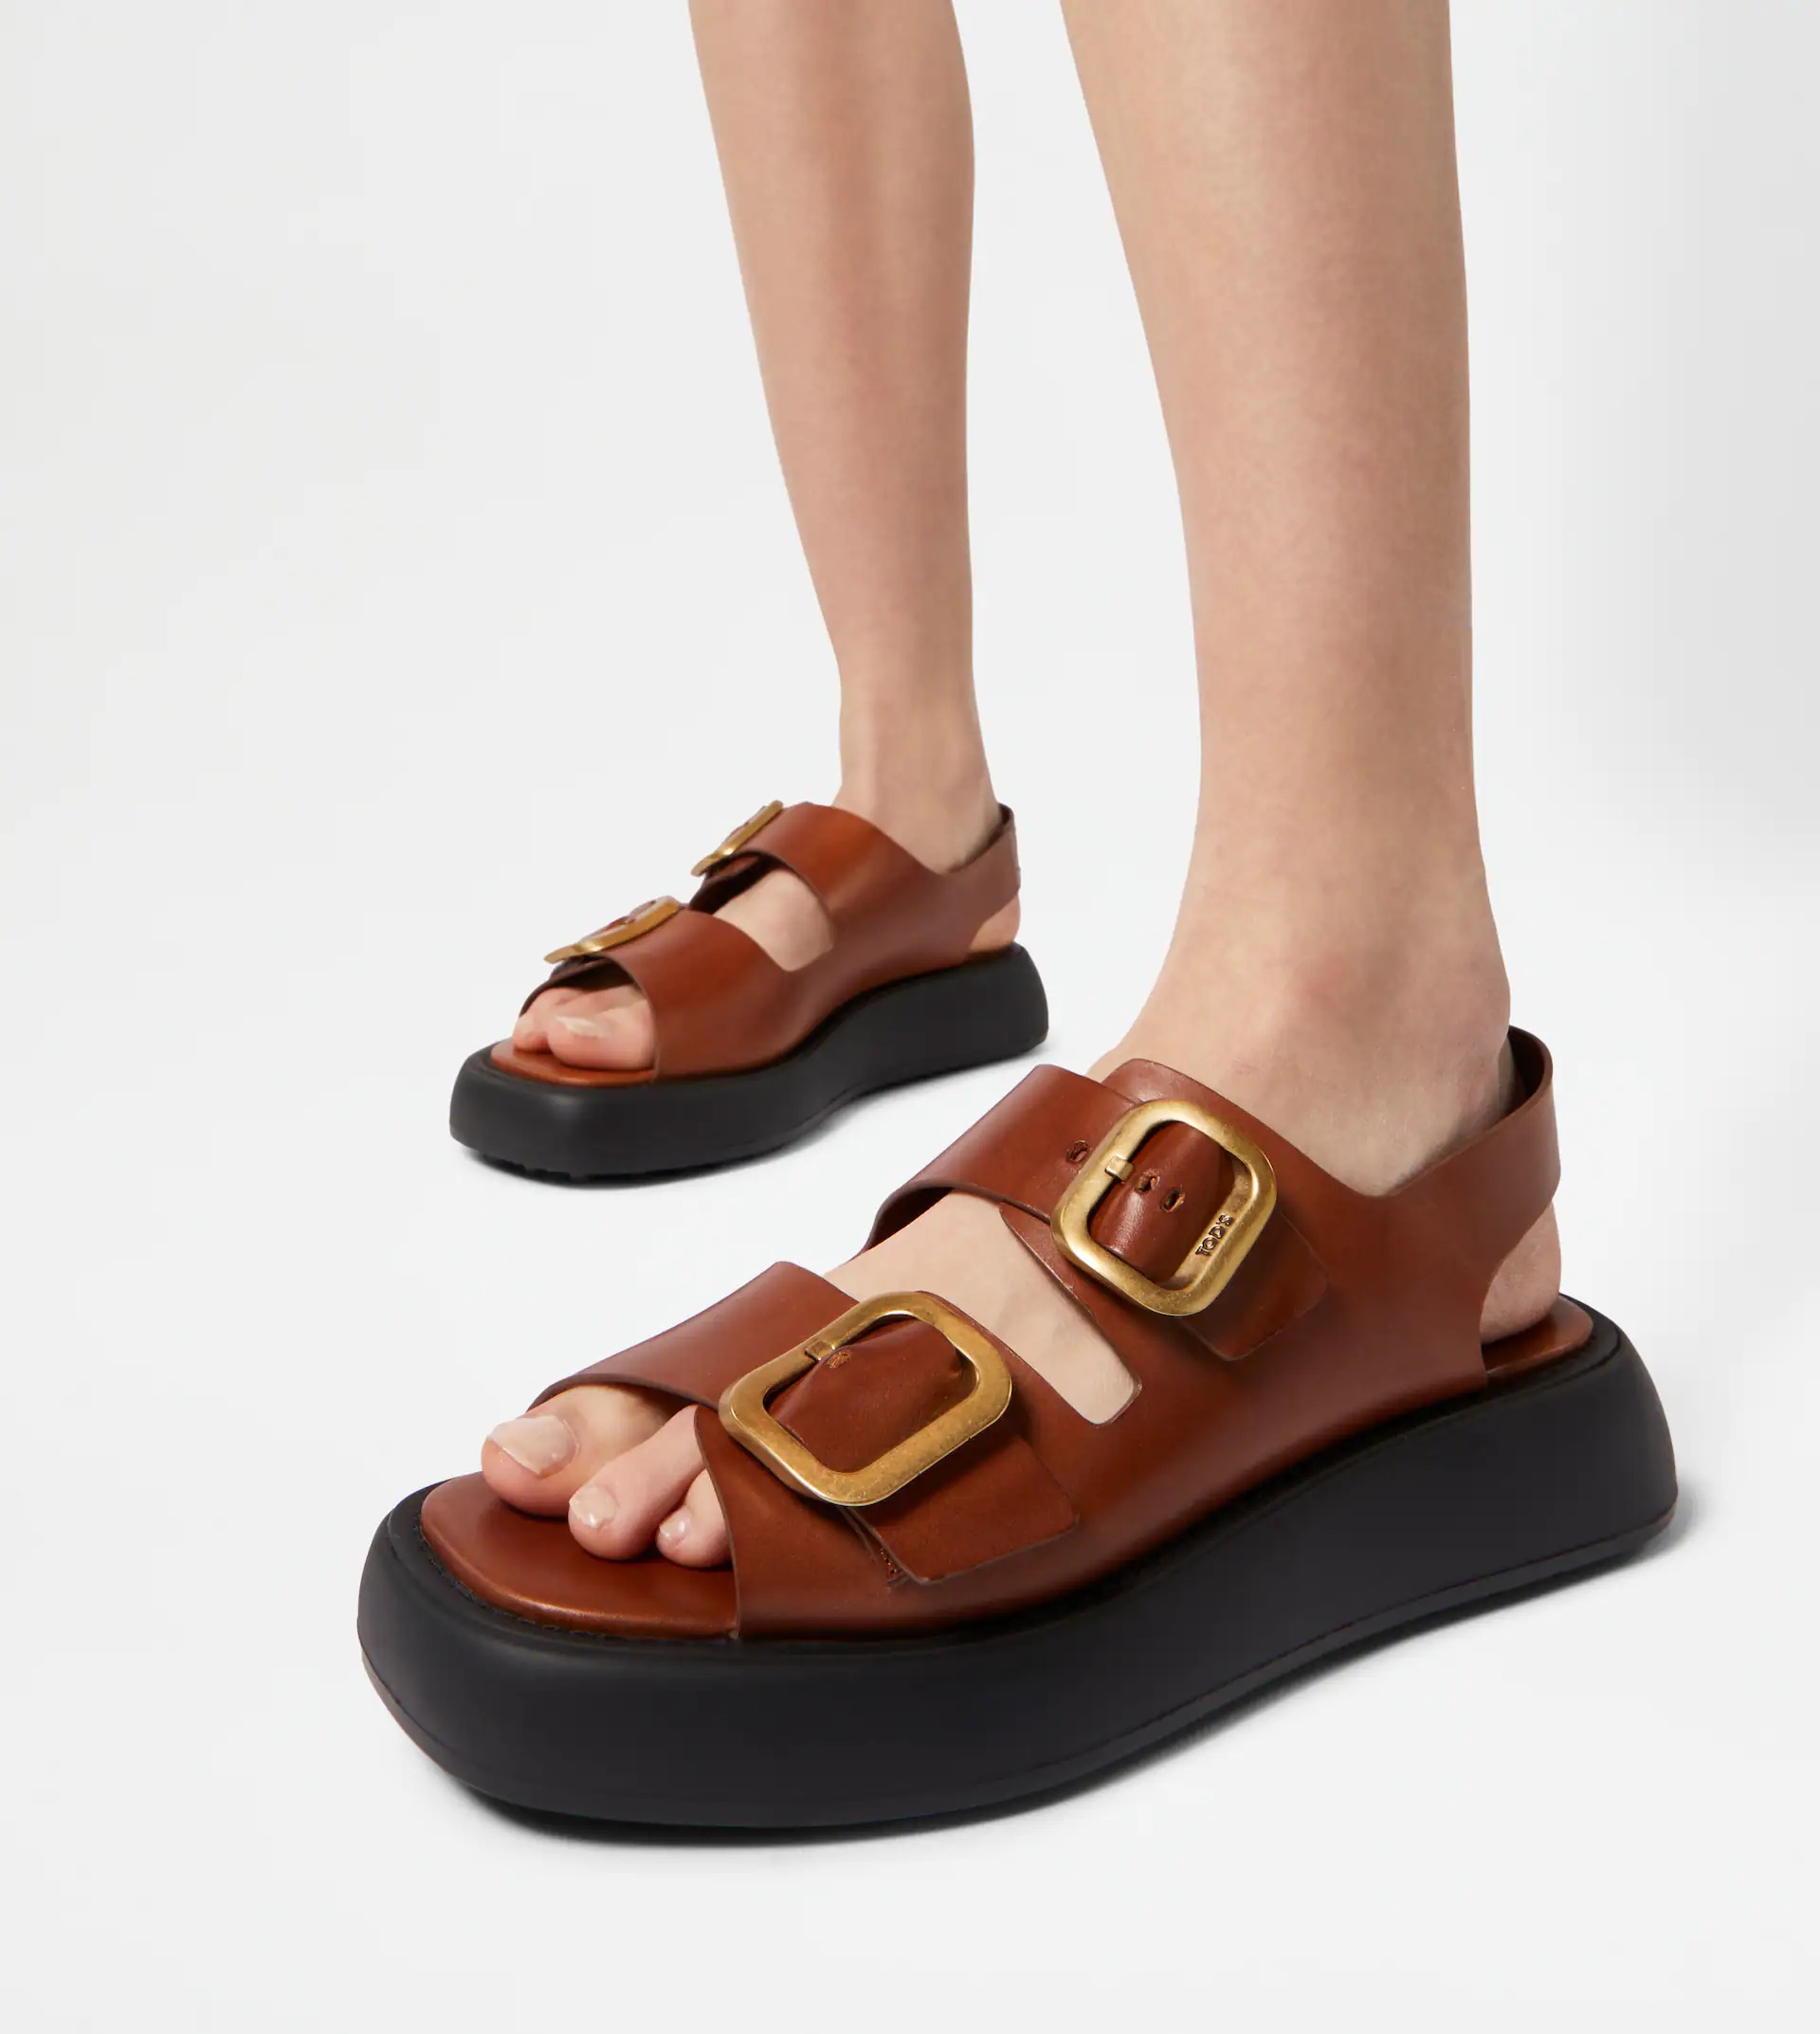 SANDALS IN LEATHER - BROWN - 2